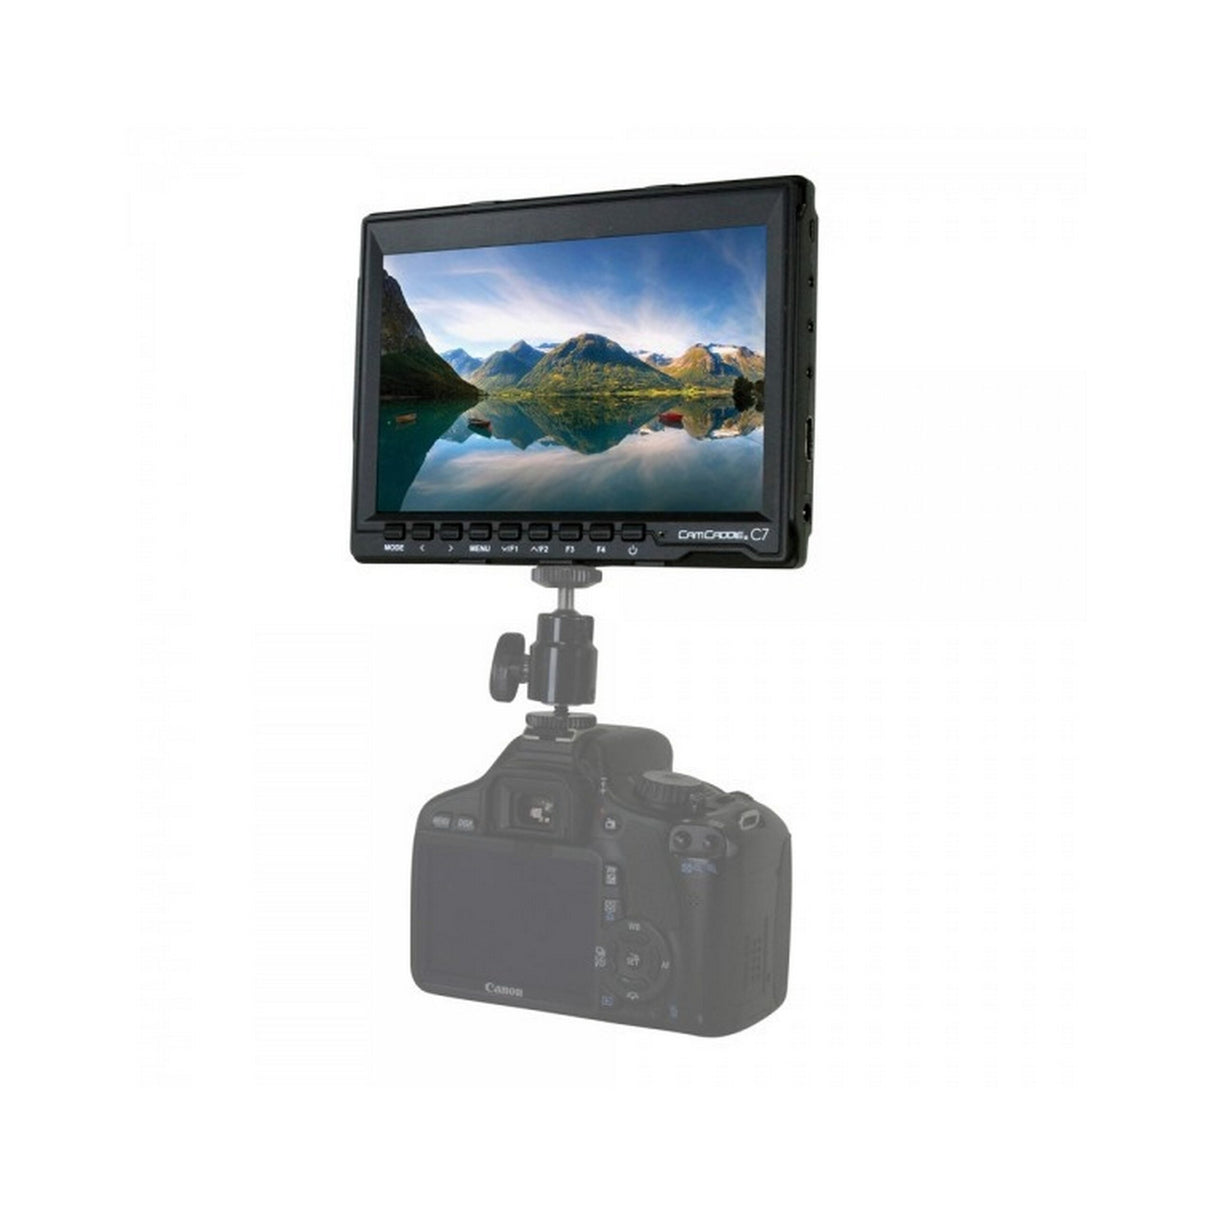 CamCaddie 0CC-MON-C7LP-EU 7 Inch HD IPS DSLR Monitor with European Power Supply and LP-E6 Battery Plate